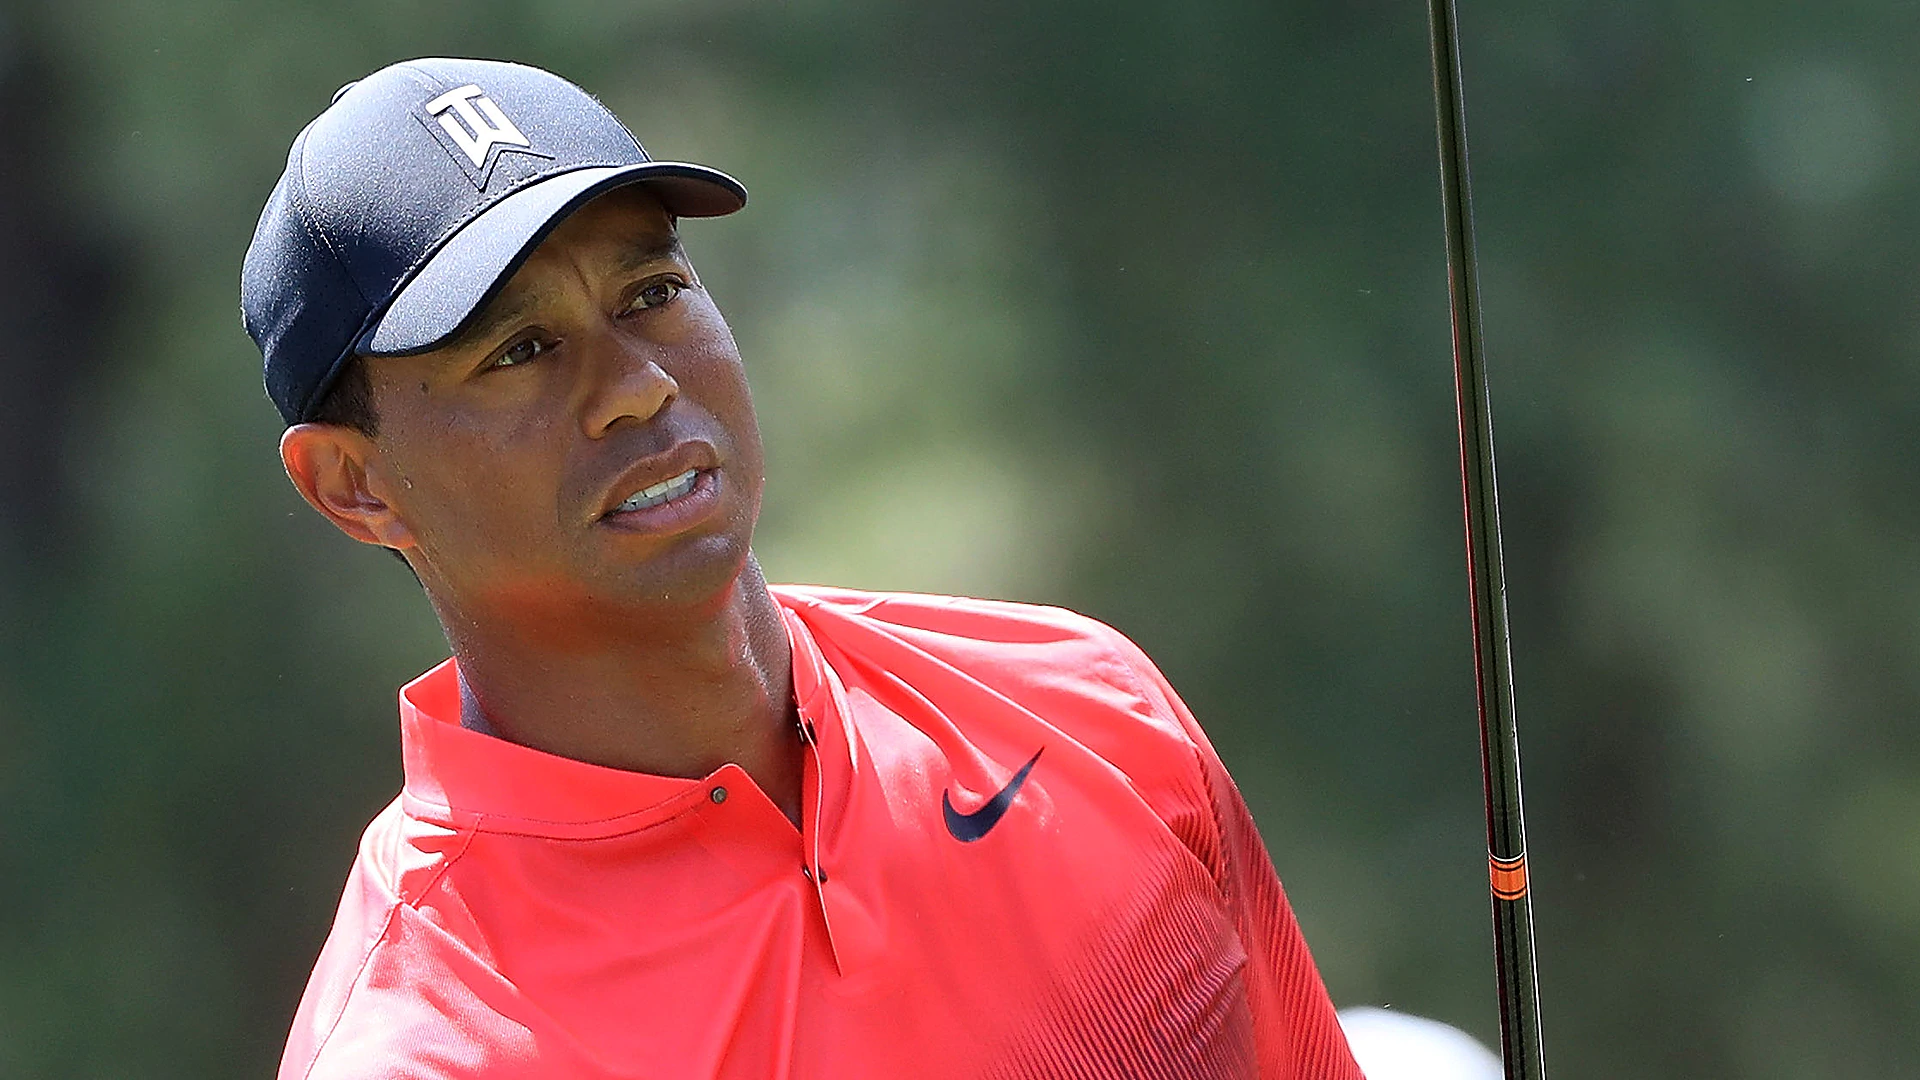 Woods commits to play The Open at Carnoustie